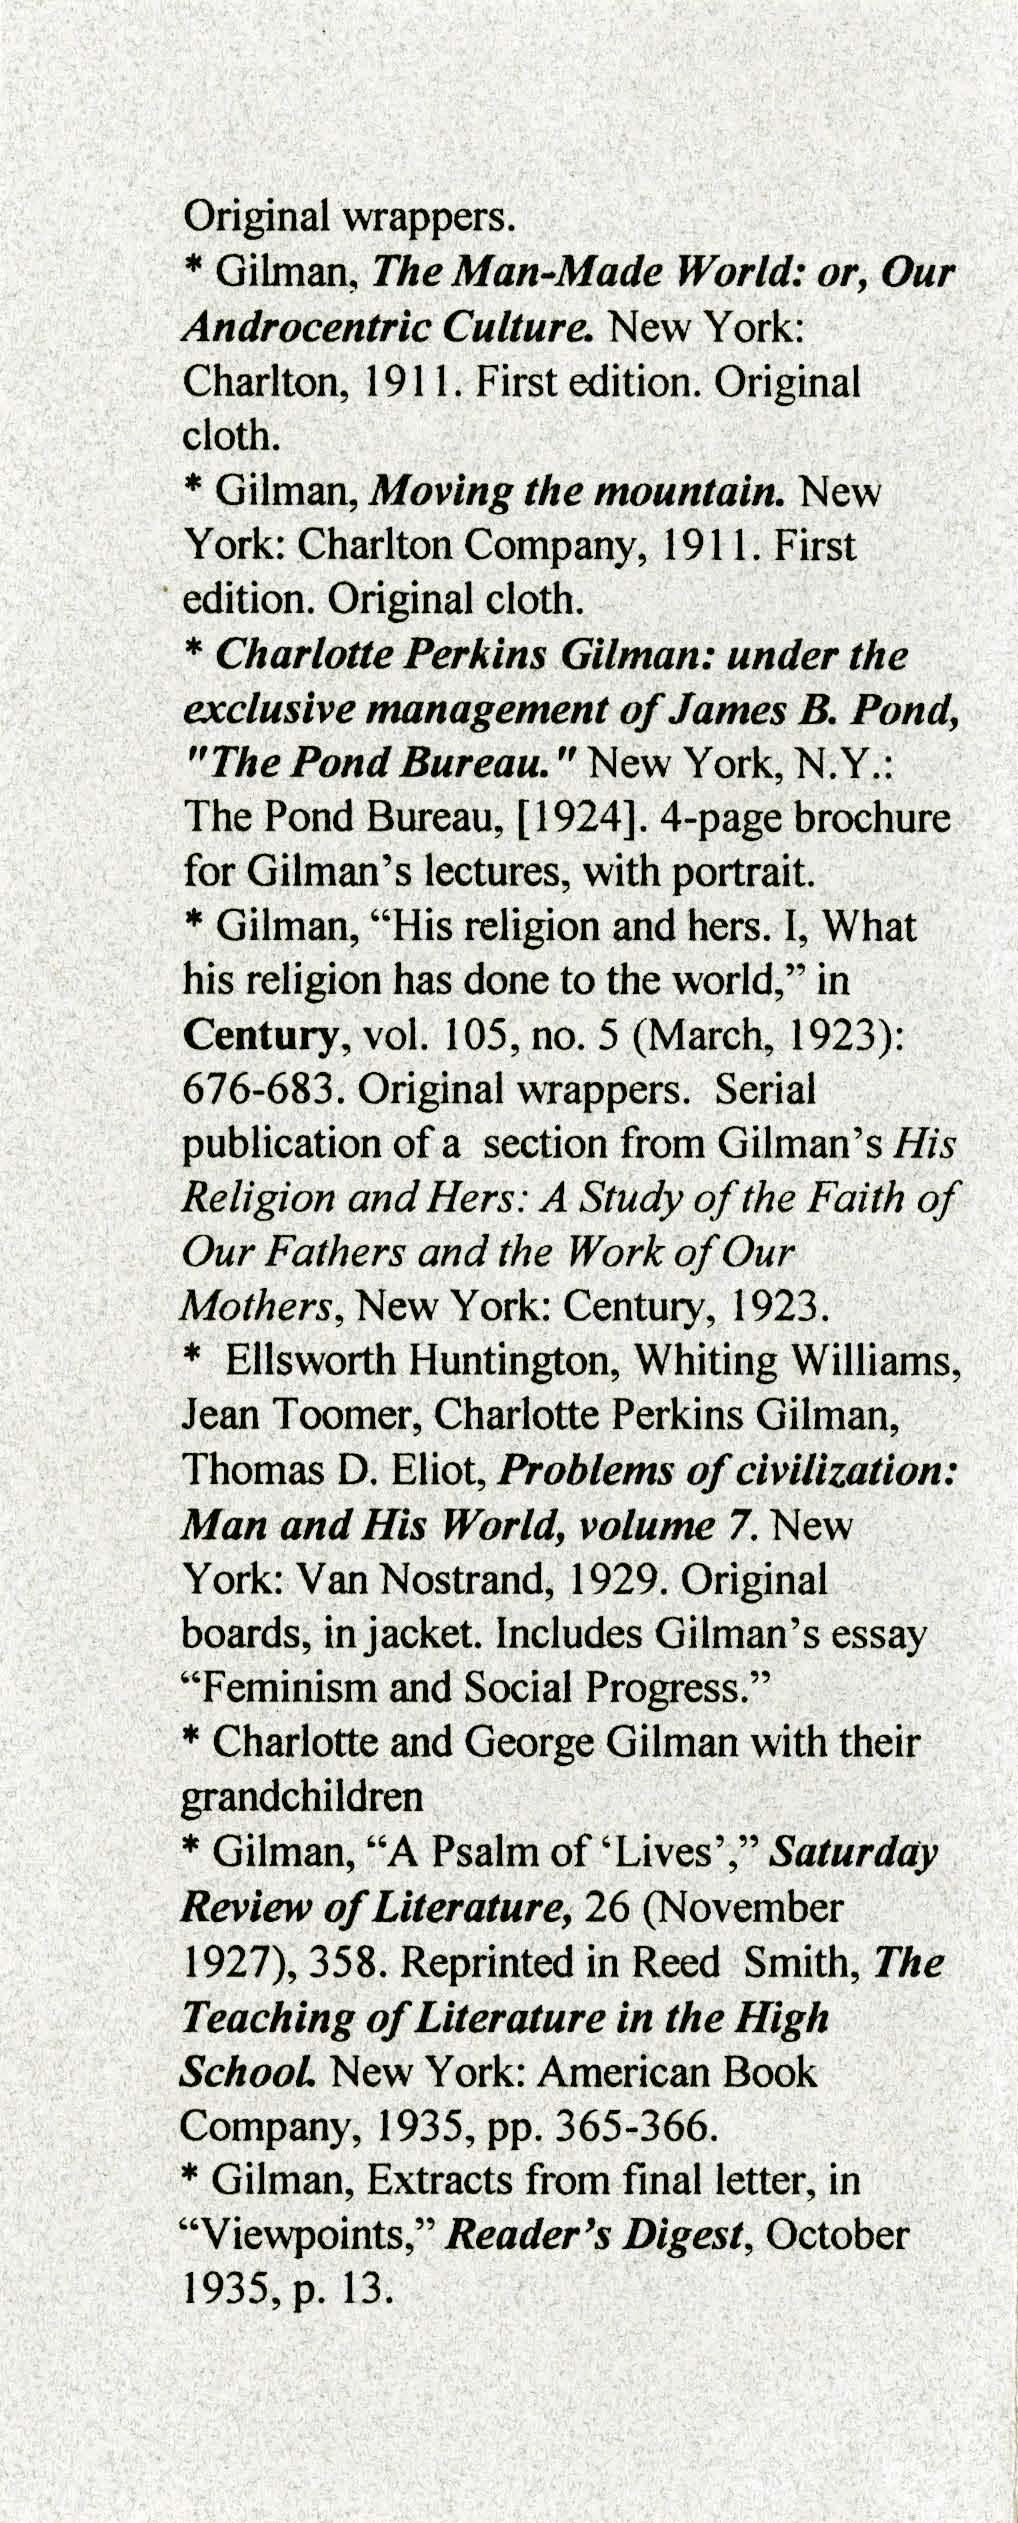 Original wrappers. * Gilman, The Man Made World: or, Our Androcentric Culture. New York: Charlton, 1911. First edition. Original cloth. * Gilman, Moving the mountain. New York: Charlton Company, 1911.